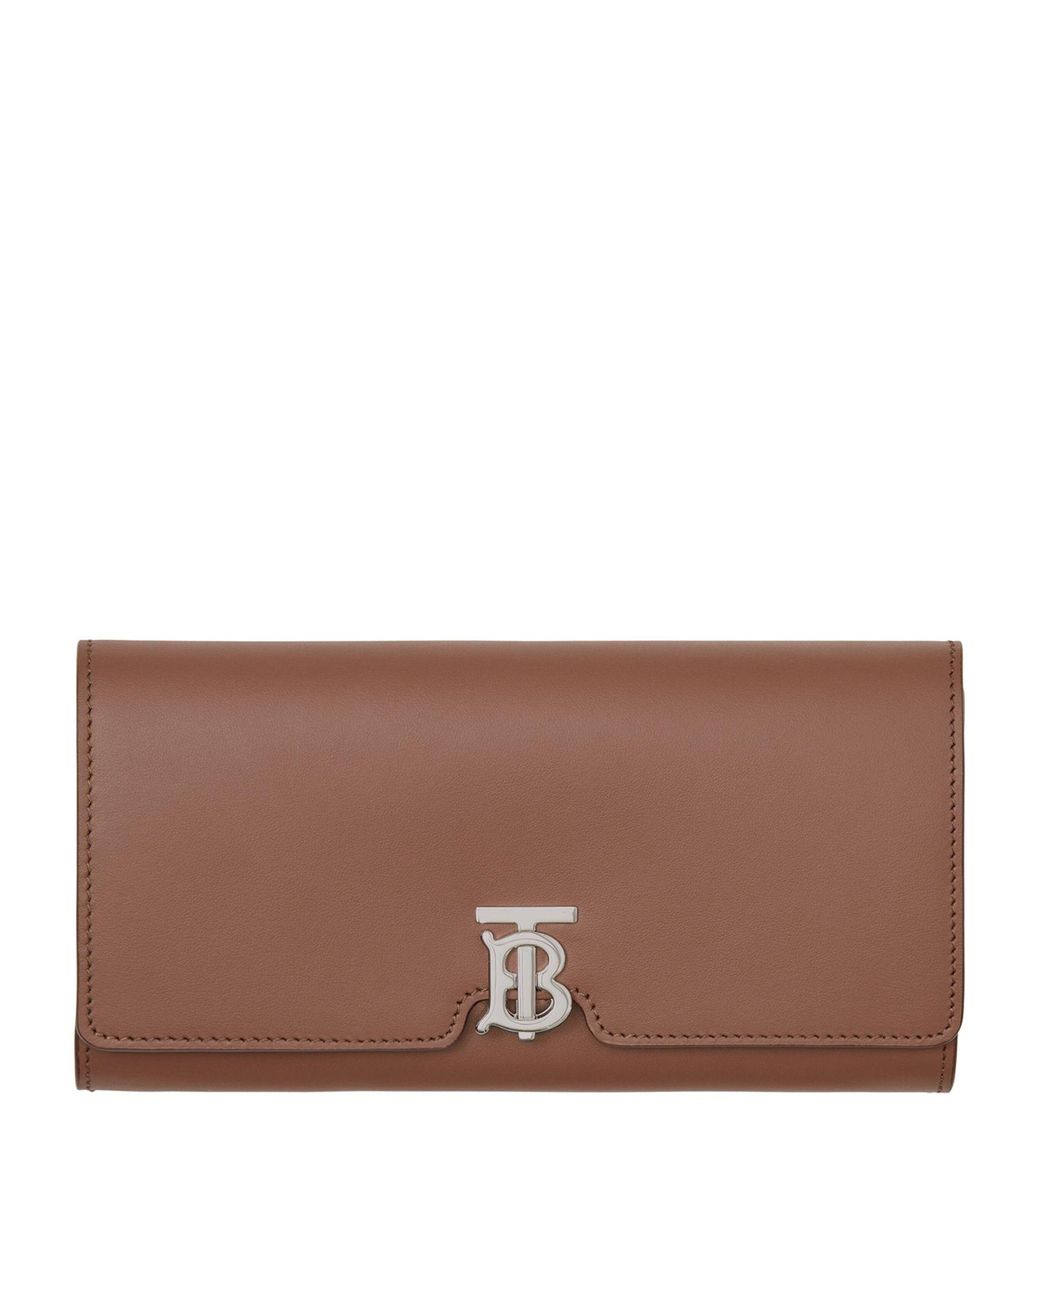 Burberry Leather Tb Monogram Continental Wallet in Brown | Lyst Canada